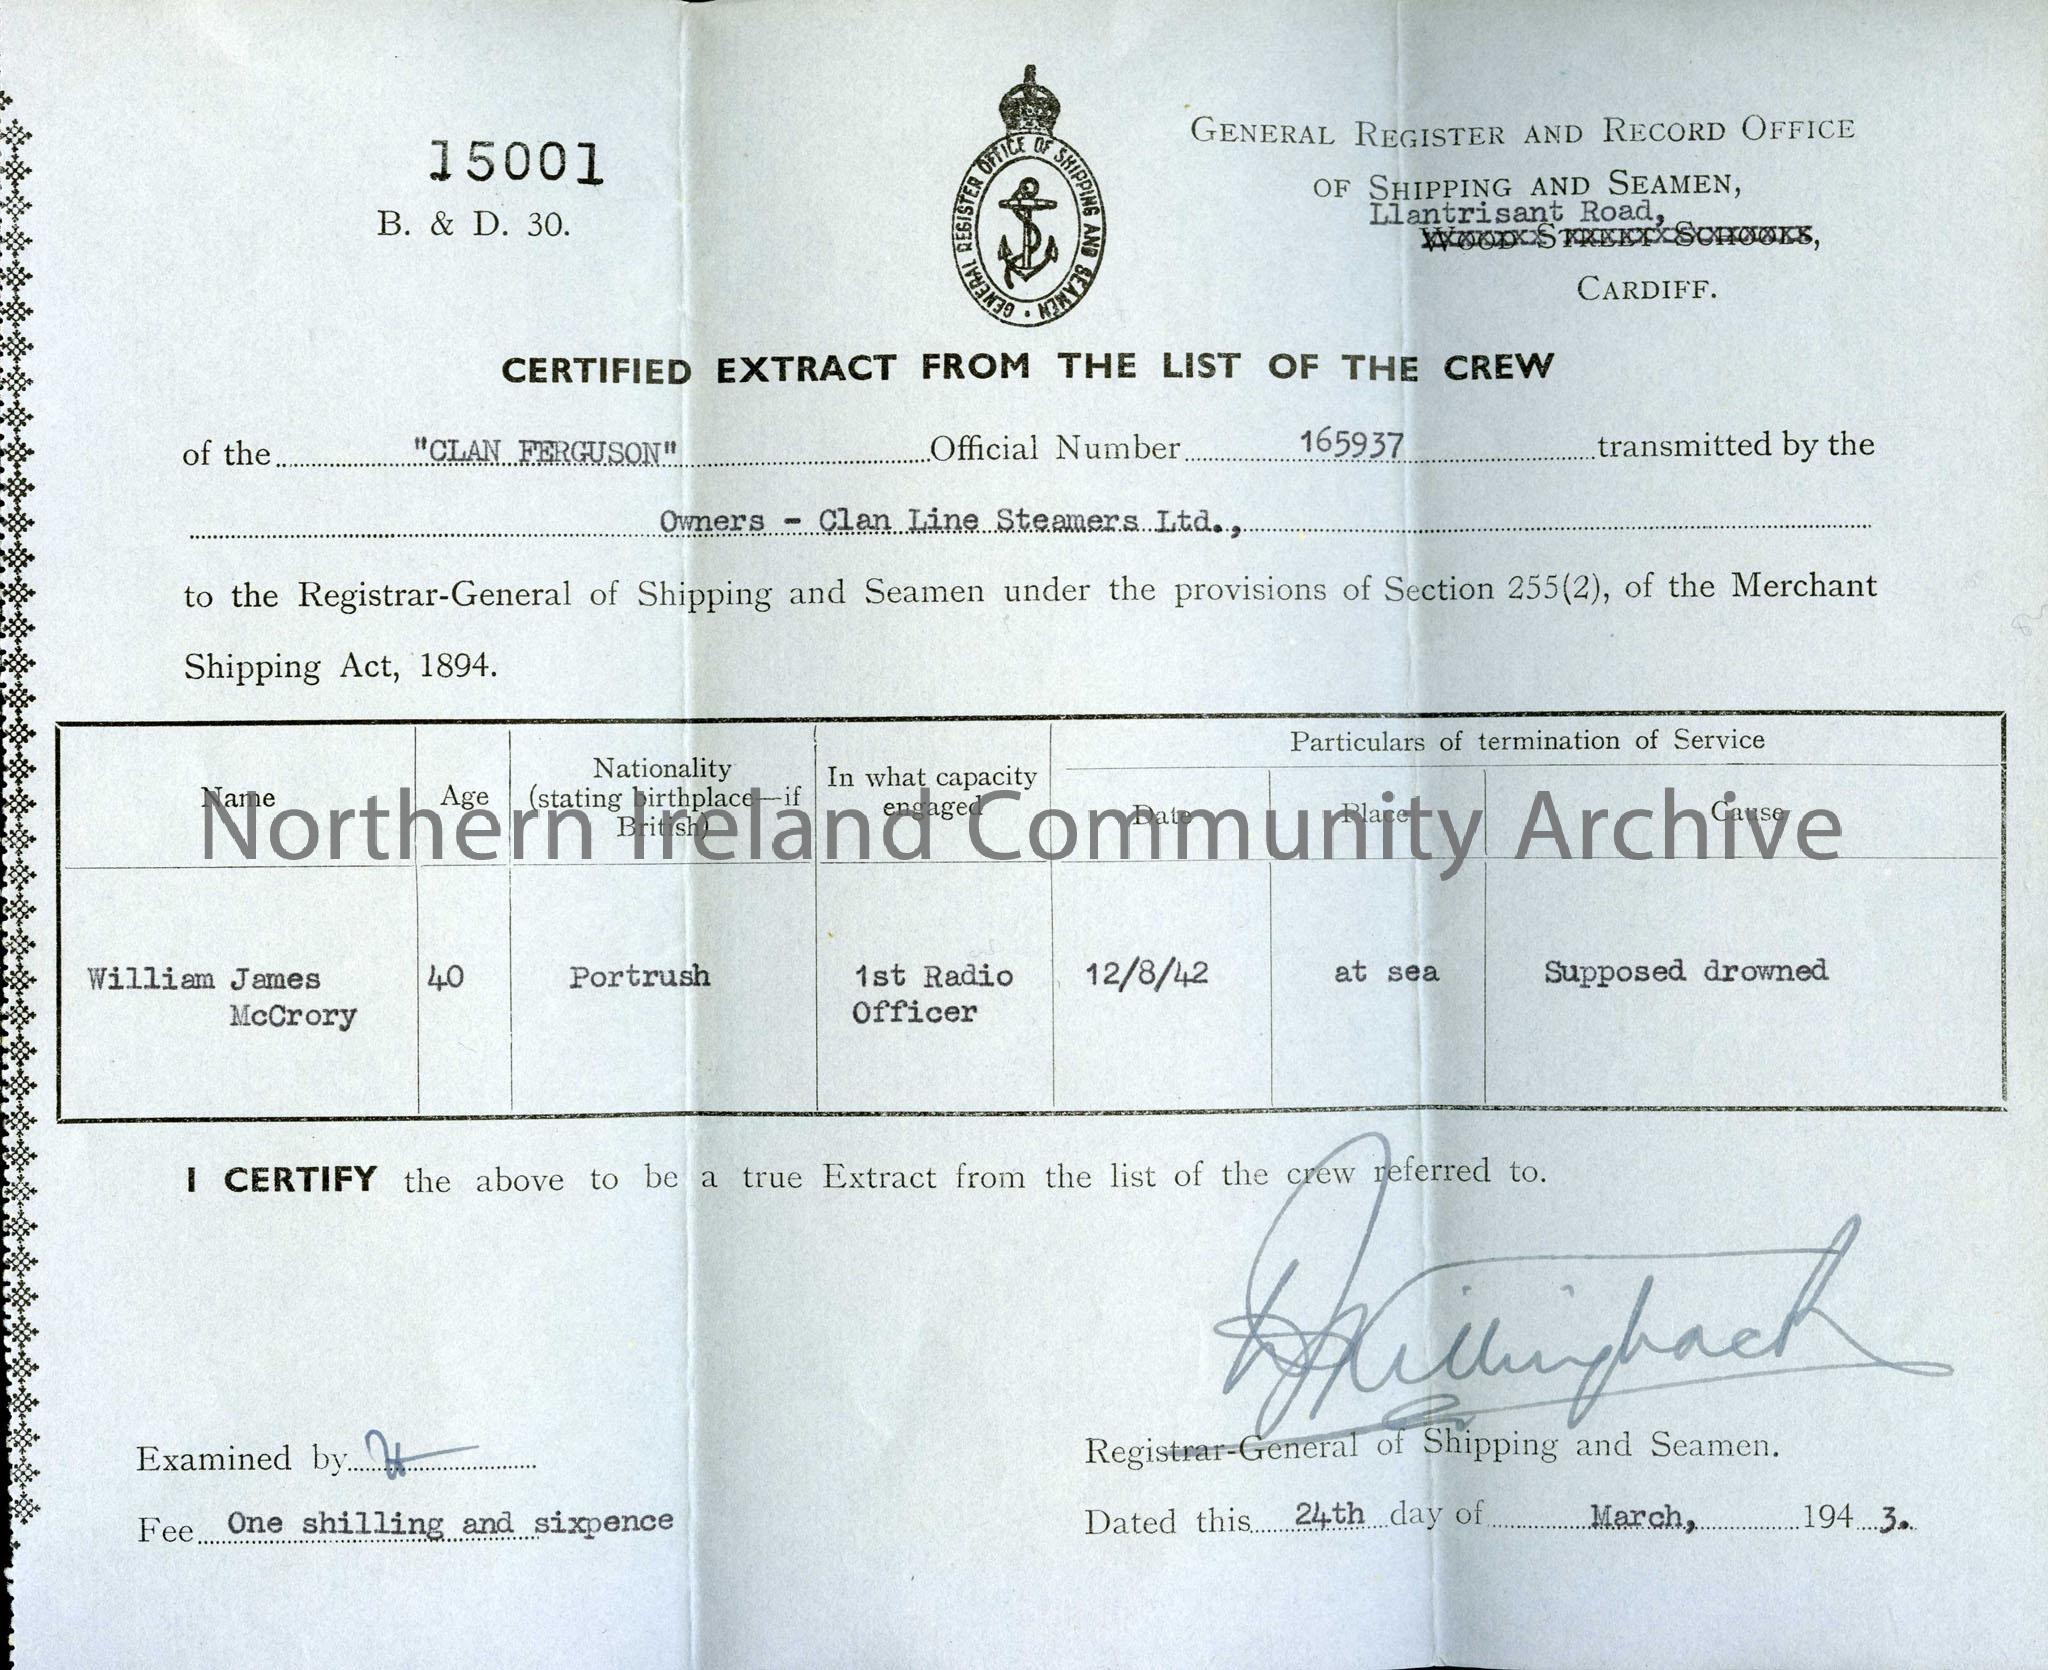 Official document from the General Register and Record Office of Shipping  and Seamen, Cardiff – Certified Extract from the List of the Crew. Gives  det… – NI Archive